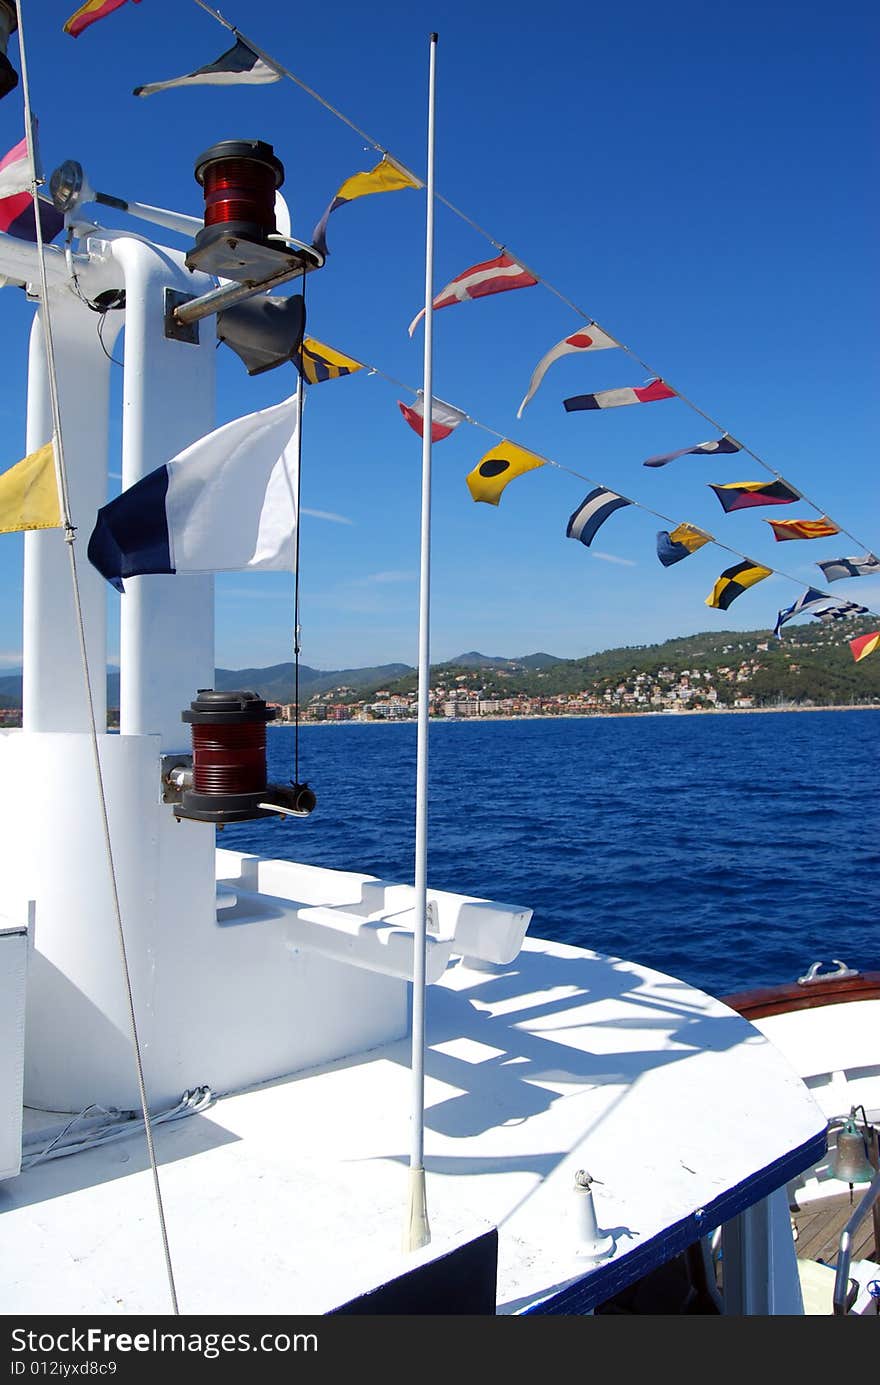 Coloured seafaring flags on a boat. These flags and their meaning costitutes the international code to communicate on sea. View of the city of Alassio in Liguria, Italy. Coloured seafaring flags on a boat. These flags and their meaning costitutes the international code to communicate on sea. View of the city of Alassio in Liguria, Italy.